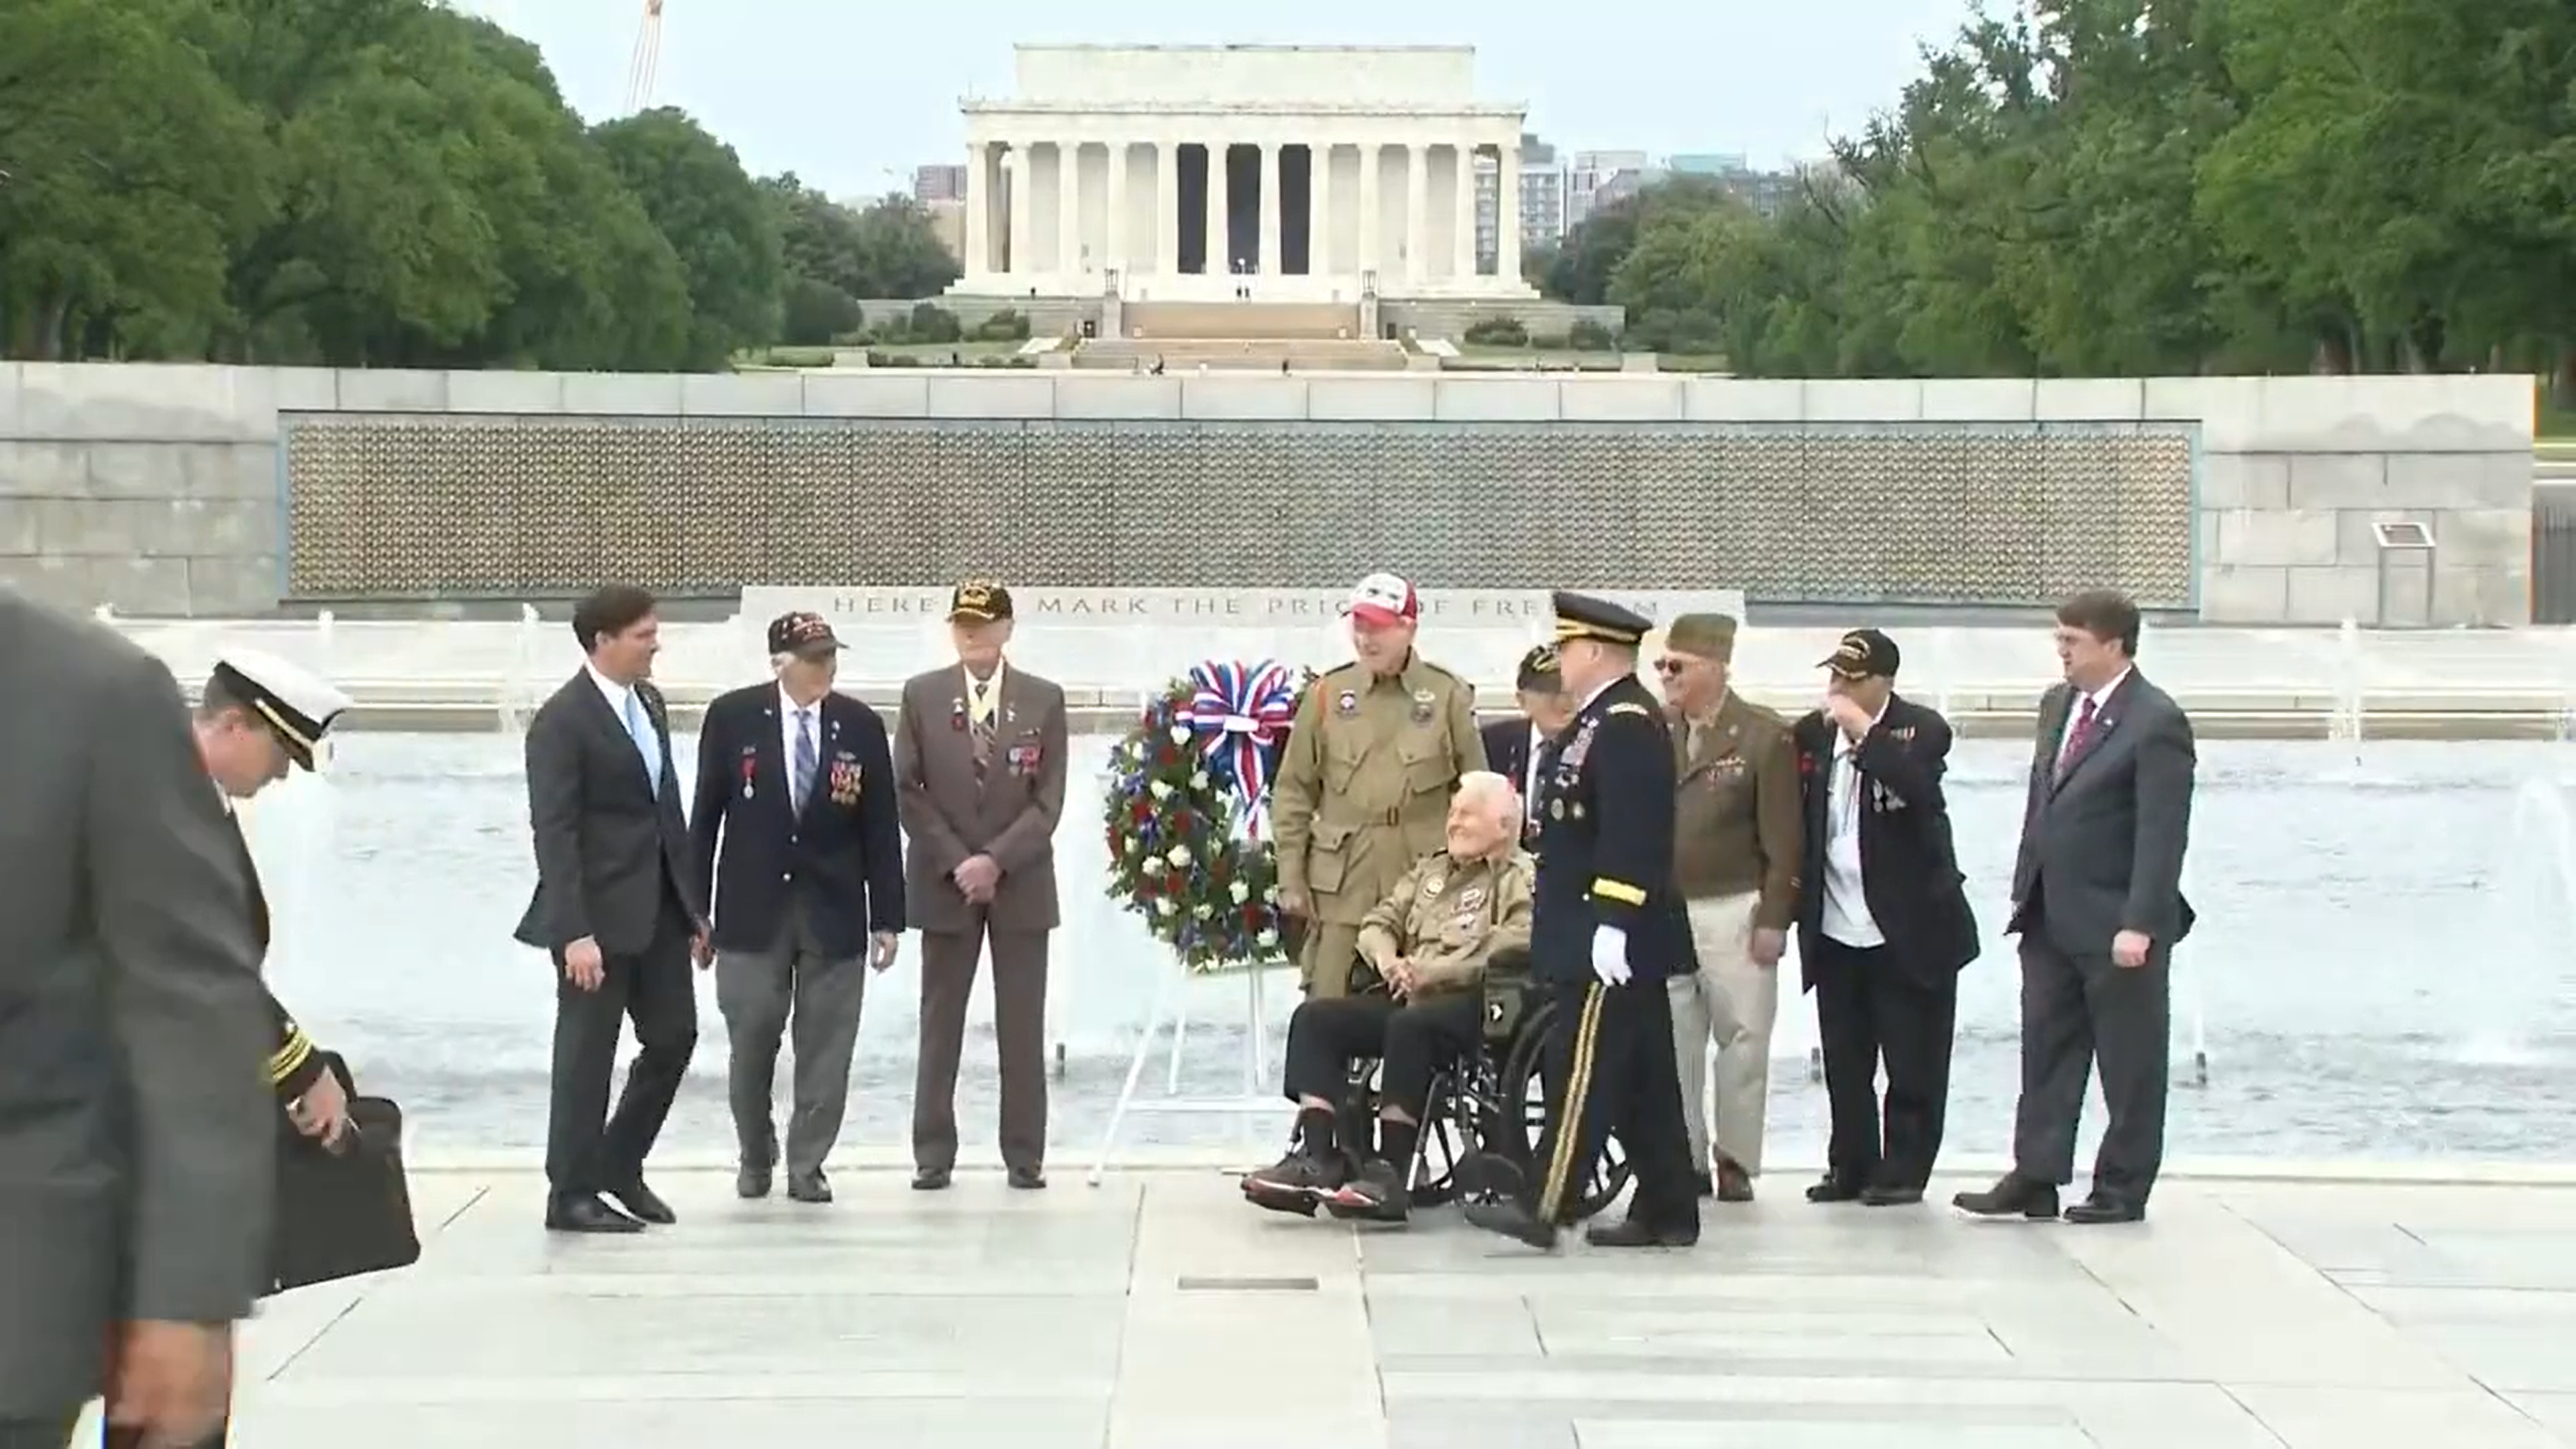 Seven 100-year-old veterans joined Trump for VE Day wreath laying